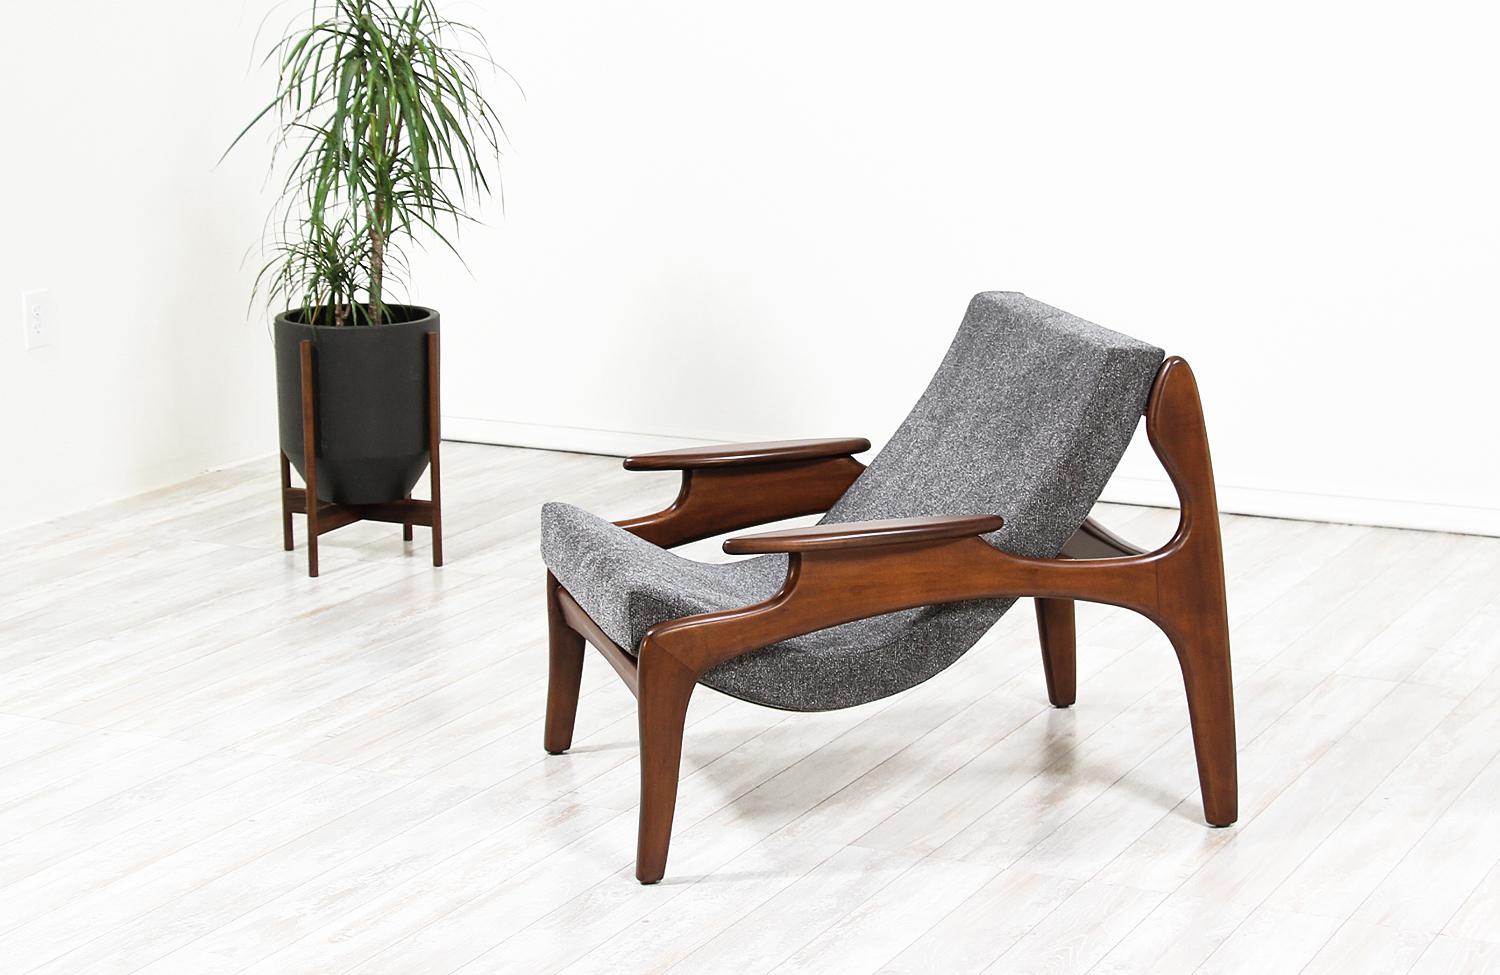 Mid-20th Century Adrian Pearsall Model 804-C Sling Chair for Craft Associates